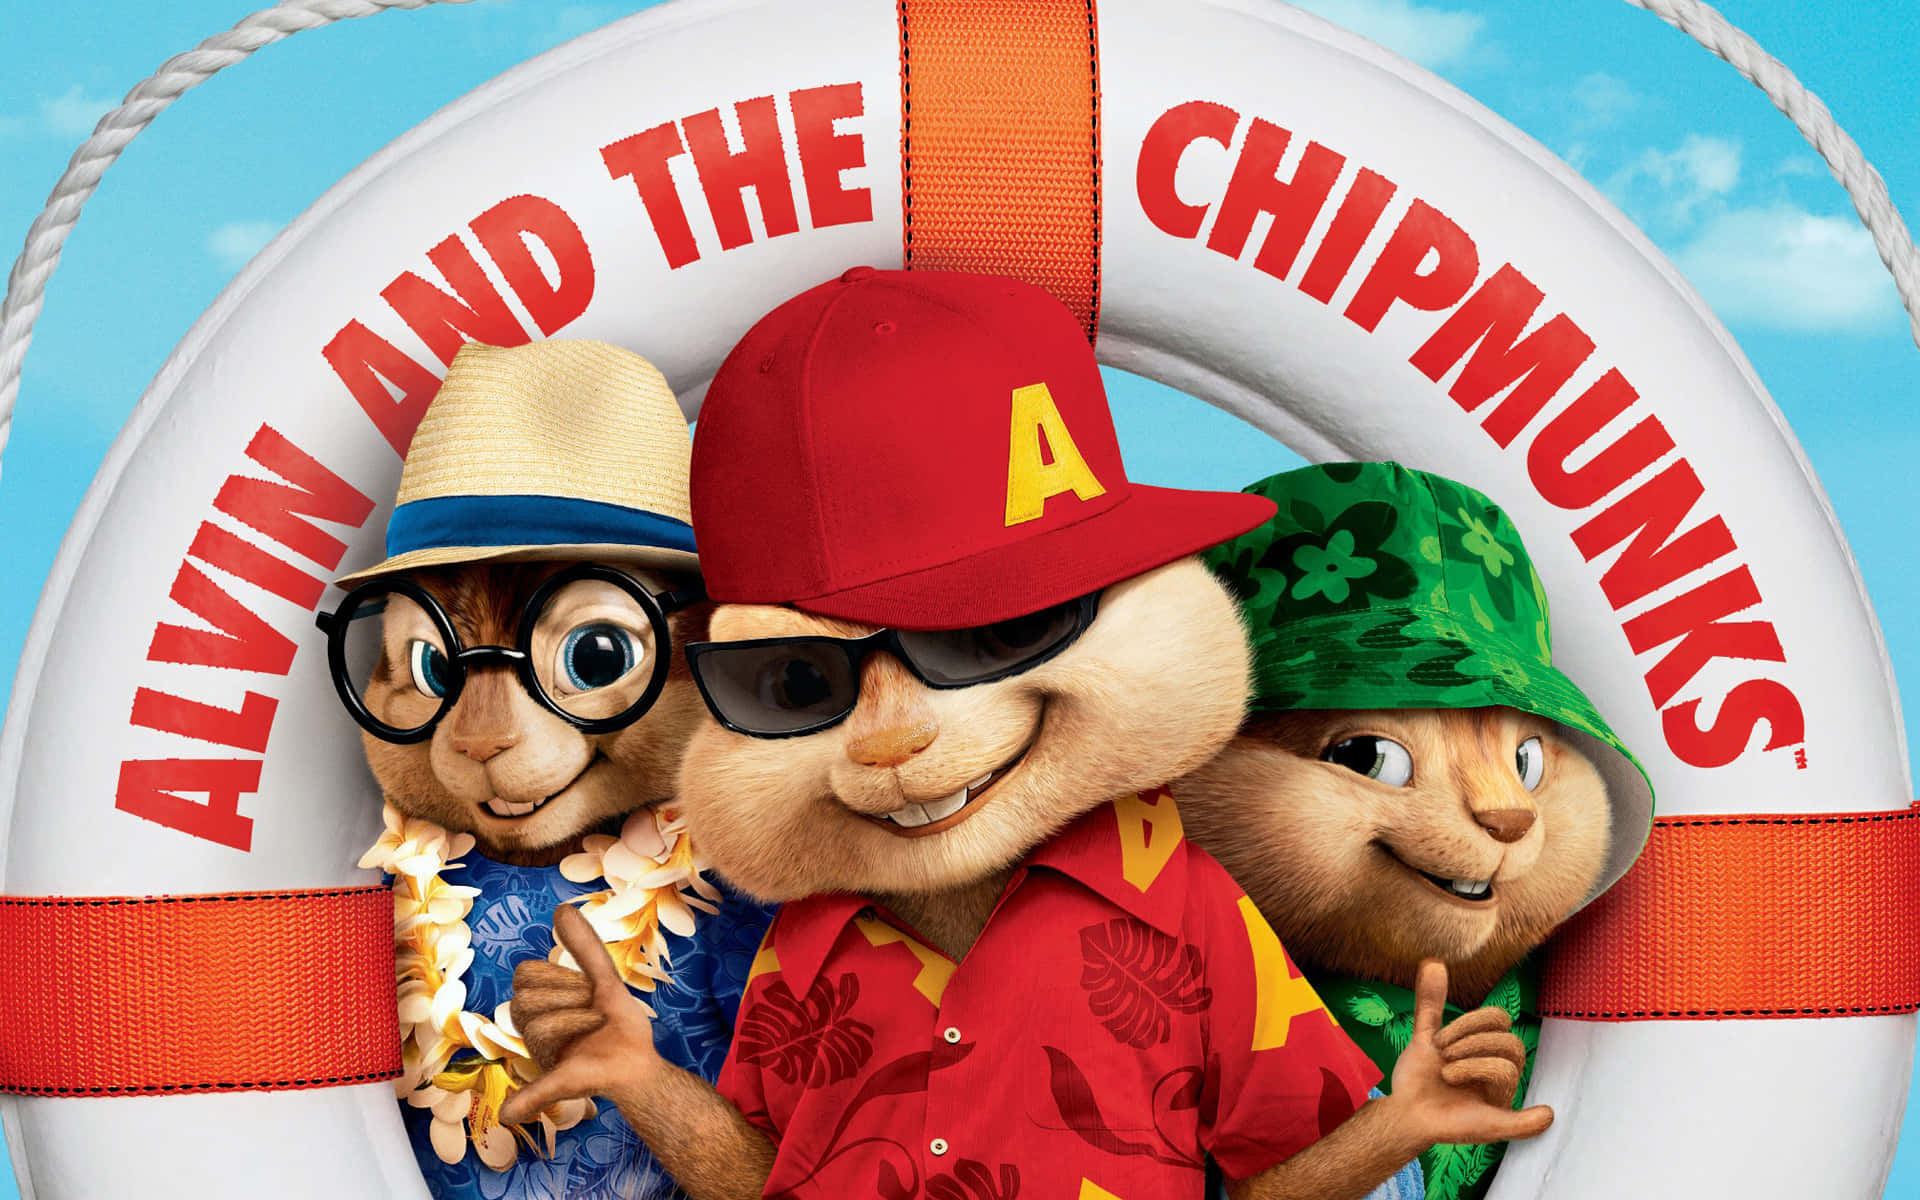 The Chipmunks Are Ready To Make Some Music